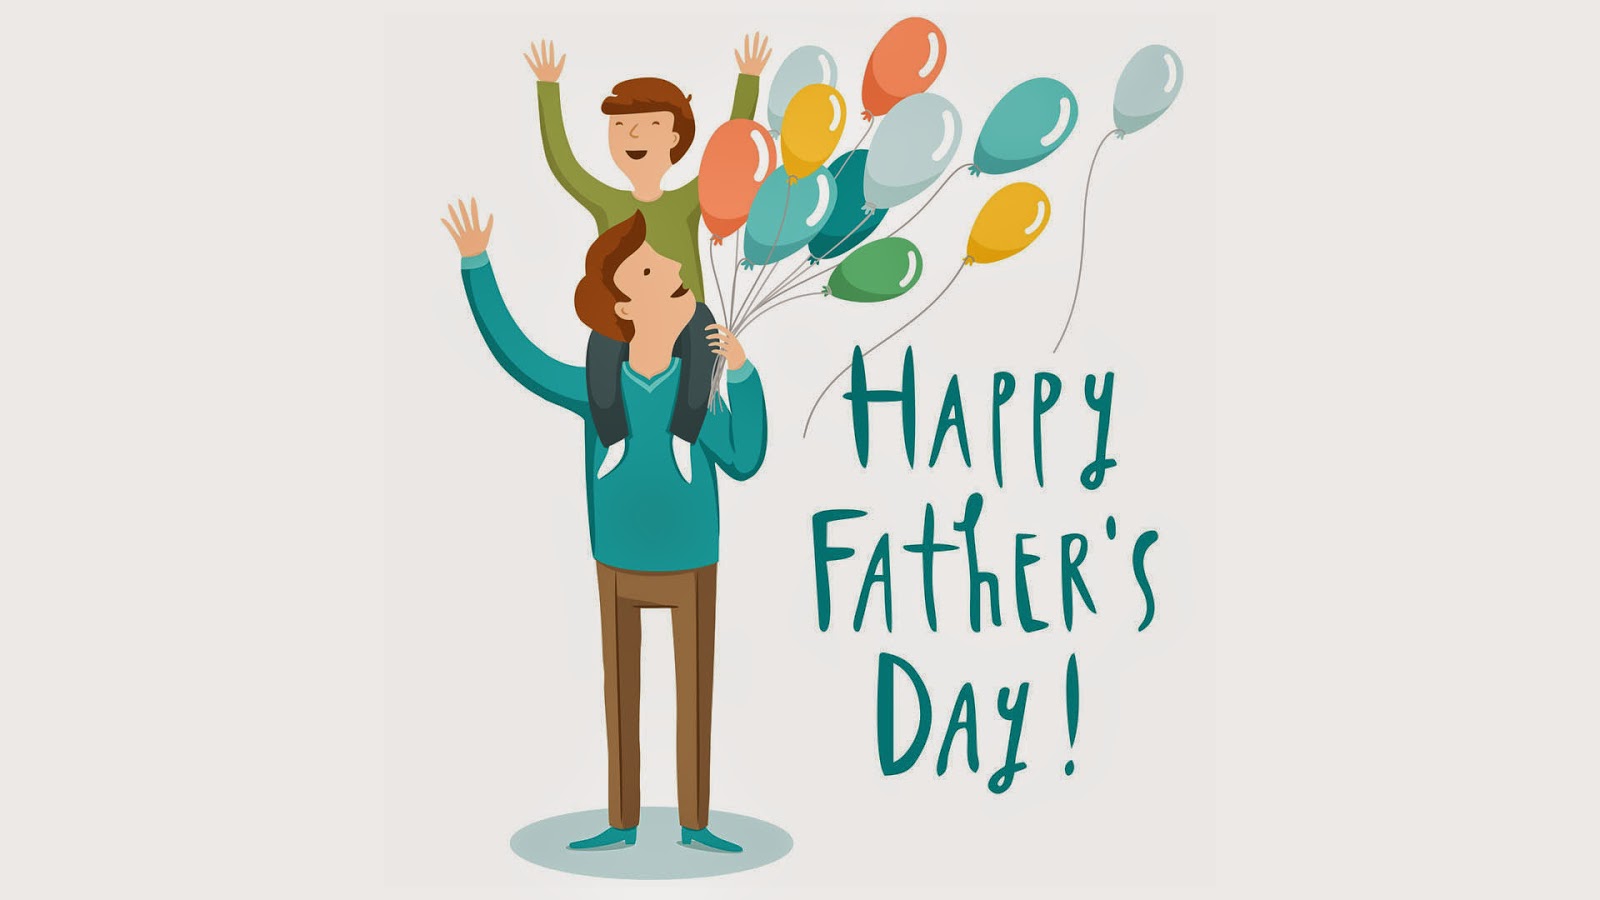 45 Most Wonderful Father’s Day Wish Pictures